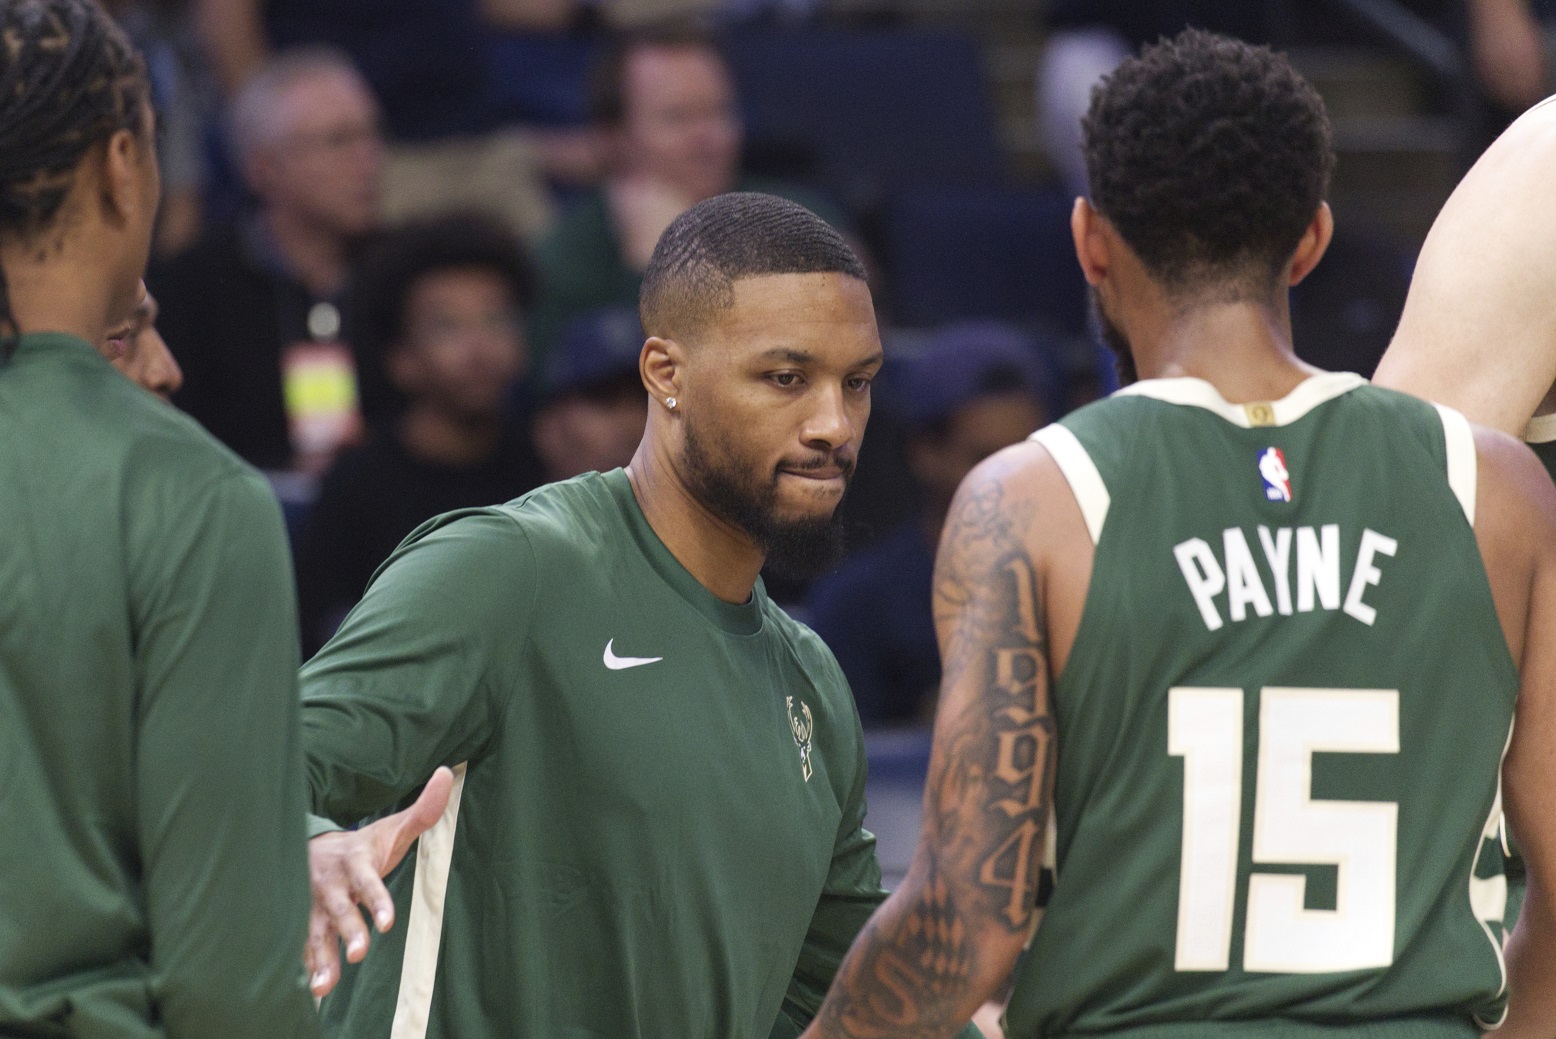 Antetokounmpo, Lillard pairing gives Bucks one of the best duos in